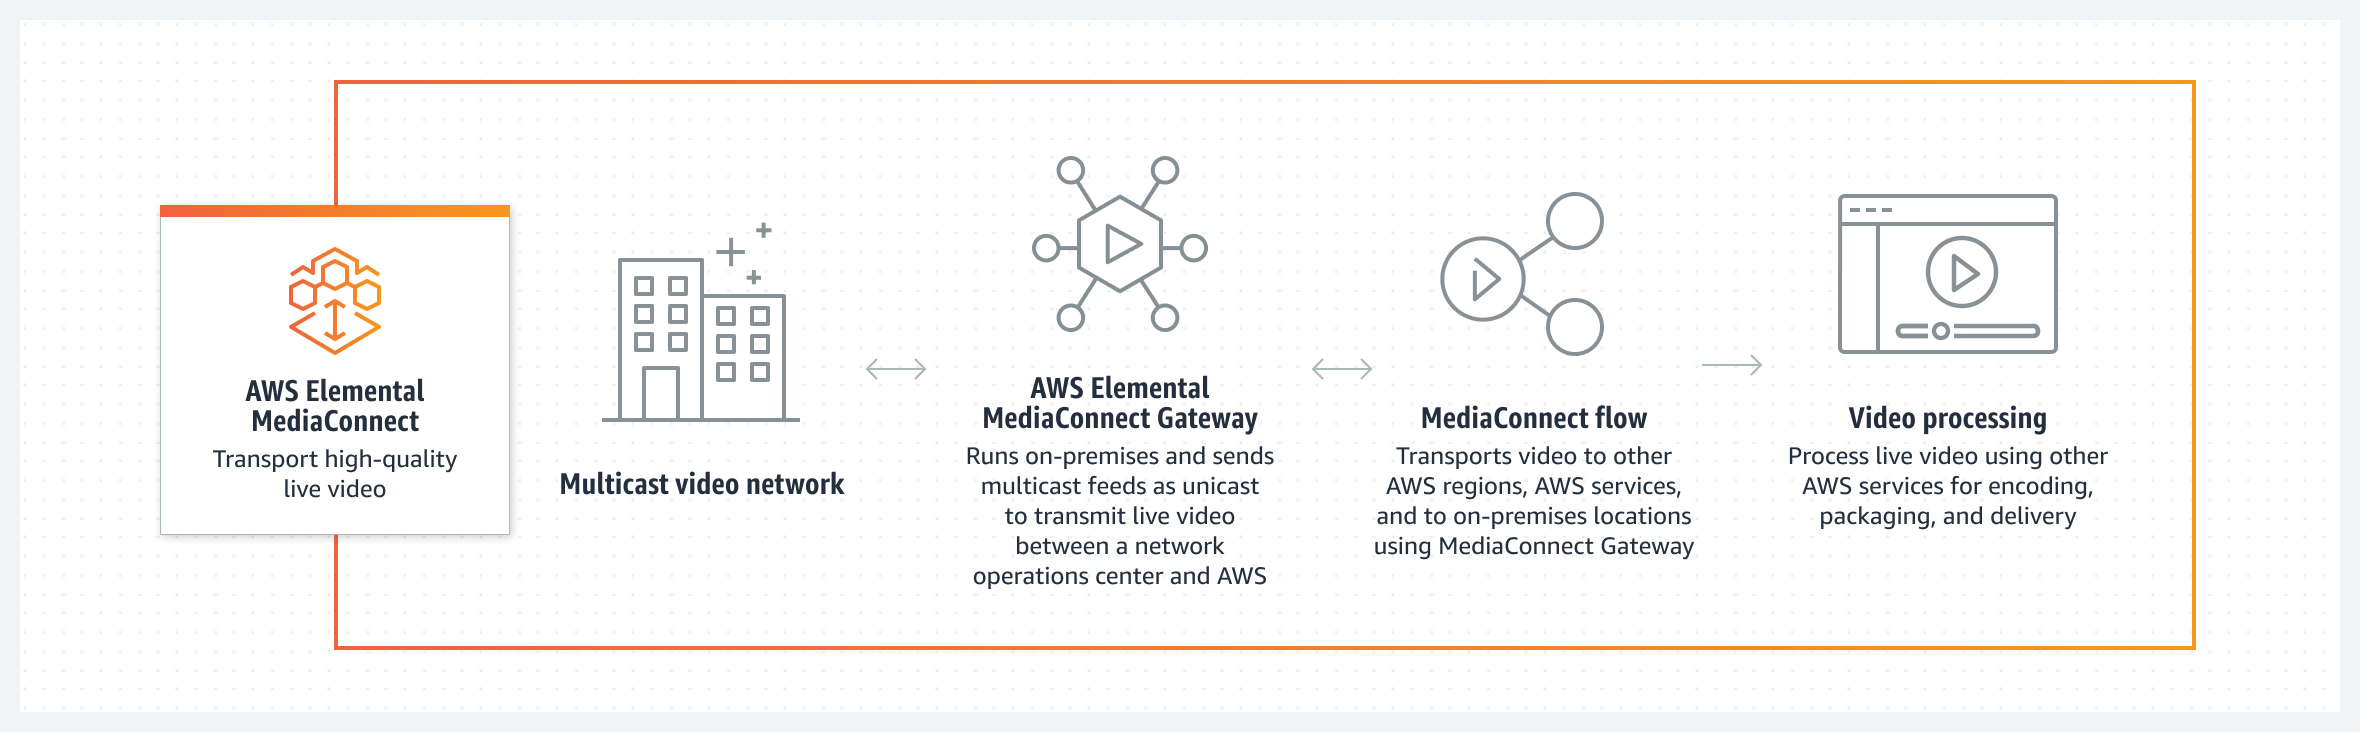 
            MediaConnect Gateway running on-premises and sending multicast feeds as unicast.
        